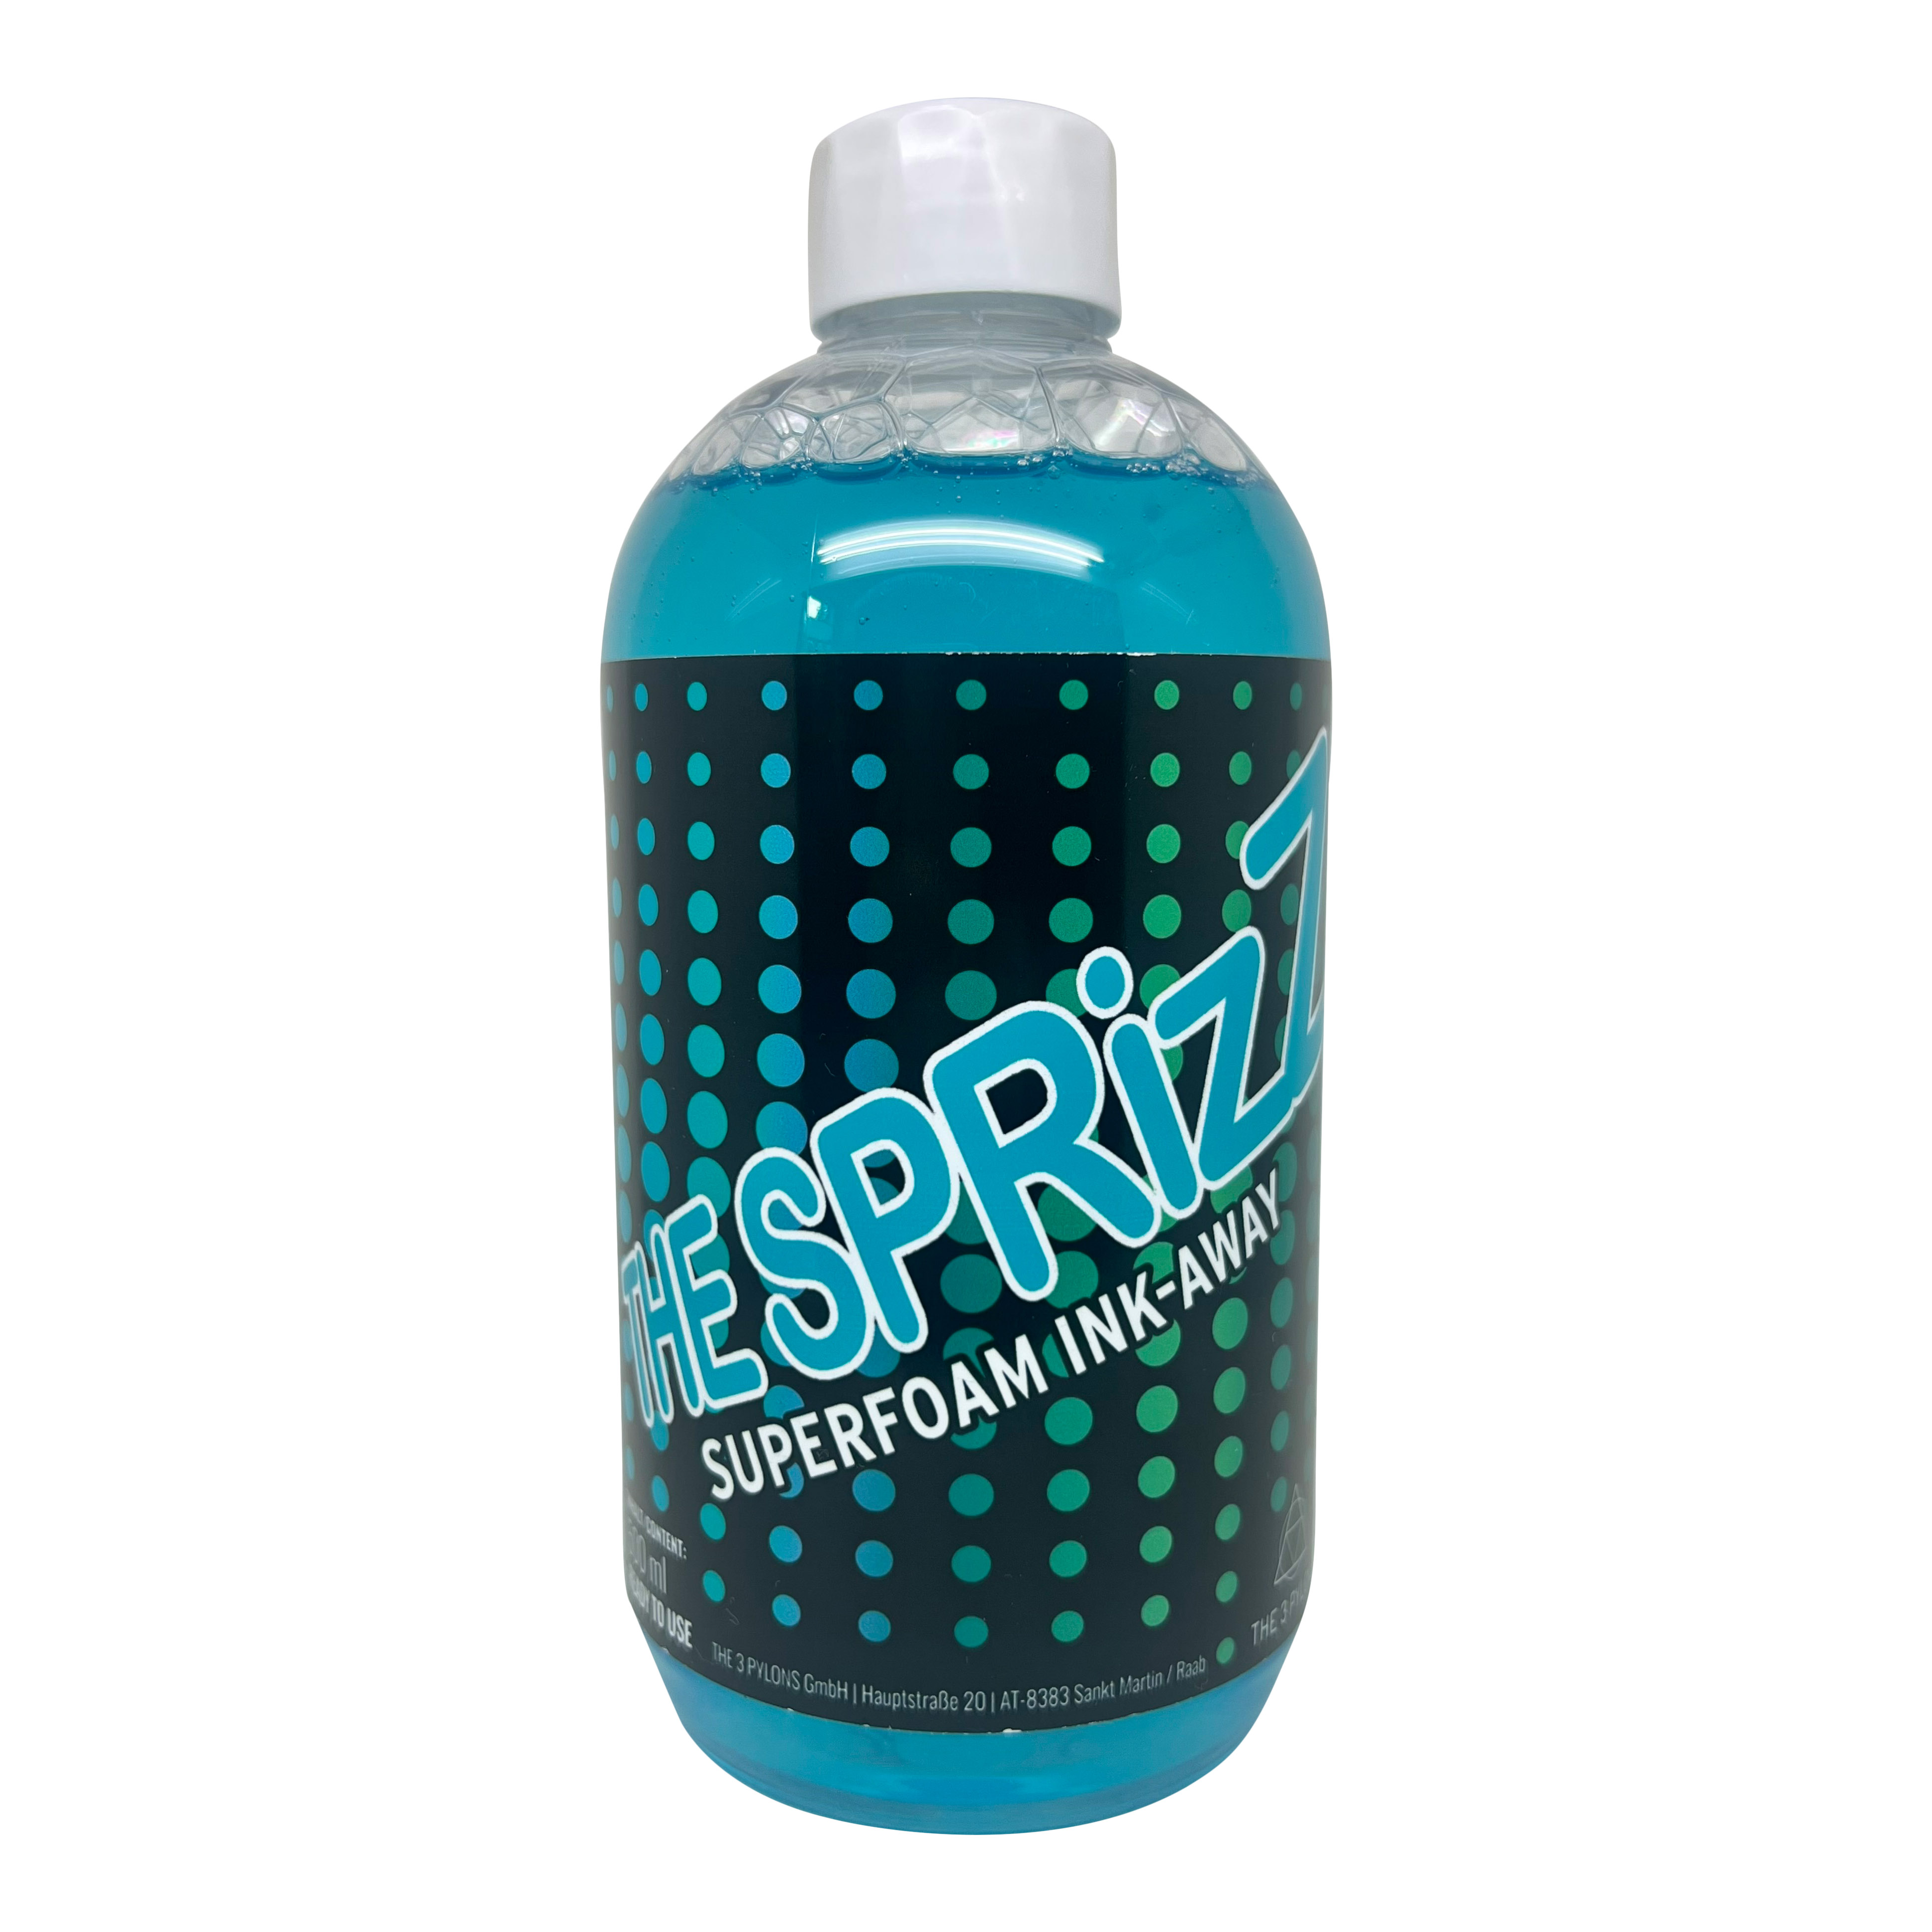 Preview: THE SPRizZ - The Ink Away Solution - ready to spritz 500 ml - Superfoam Ink-Away